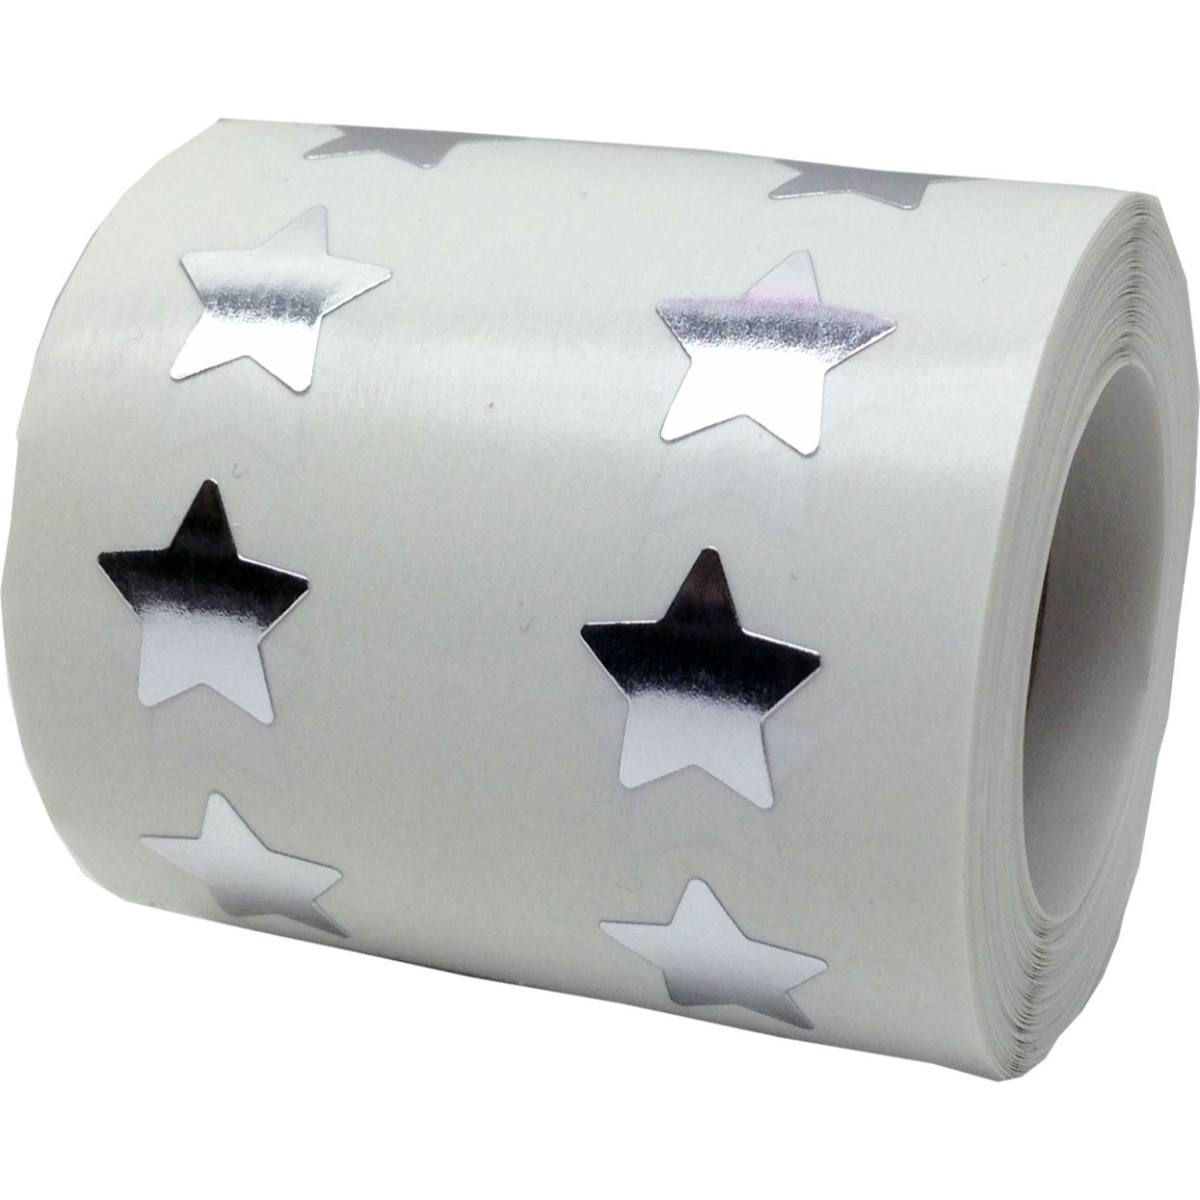 Silver Star Stickers metallic silver foil star labels 45mm . Packet of 100!